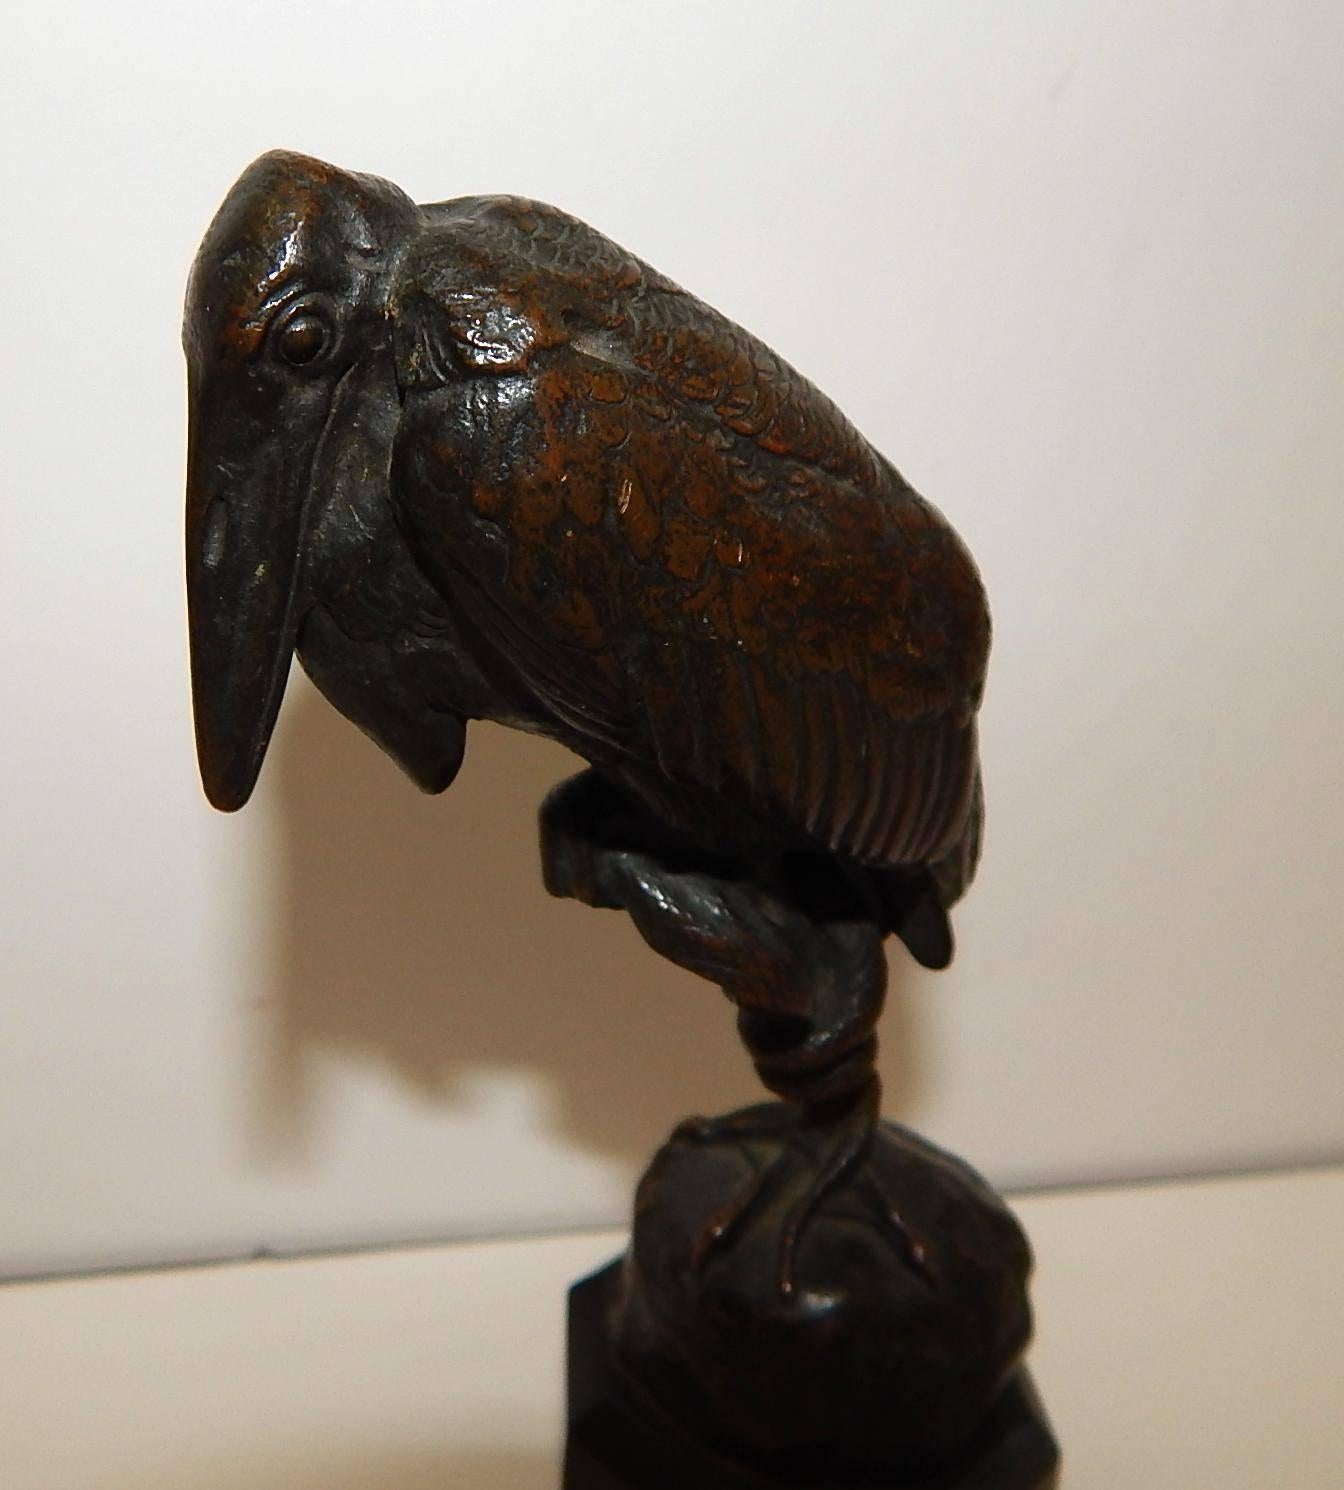 Antoine-Louis Barye (1796-1875.) Bronze maribou stork and snake with rich brown patina, signed “Barye” on the embankment.
Antique edition cast marked F. Barbedienne Fondeur (caster.) On an octagonal black marble plinth. Measures: 6 x 3 ½ x 2 inches